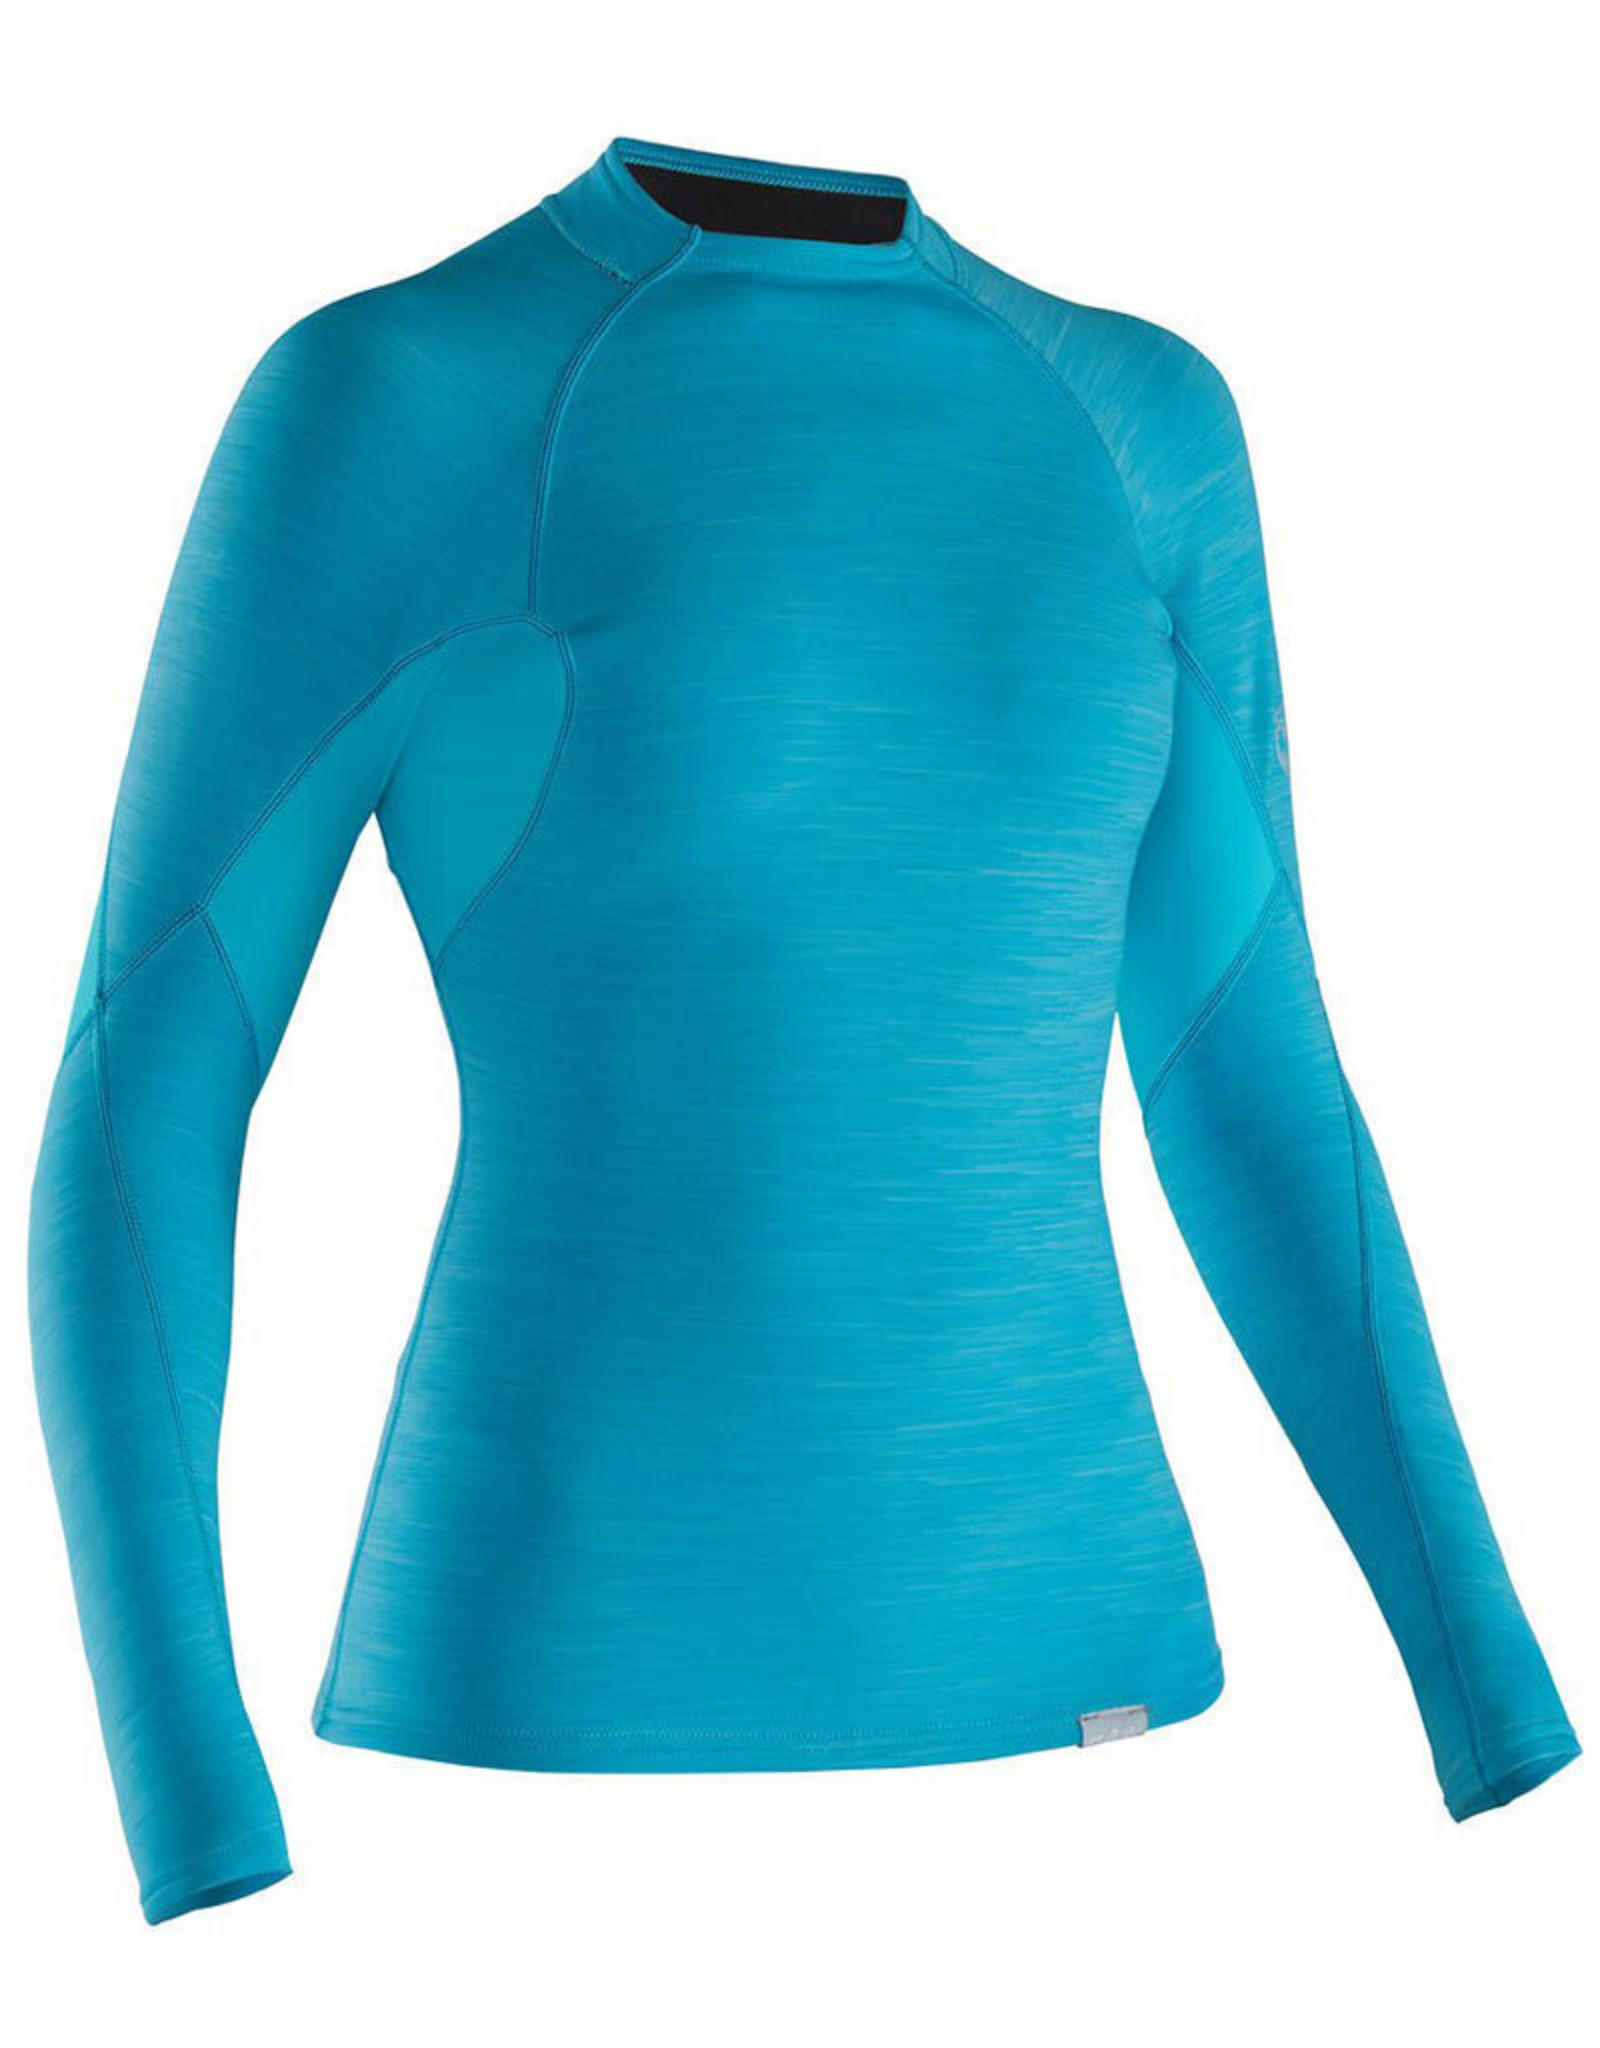 NRS NRS Hydroskin 0.5 L/S Shirt Closeout - Wmns